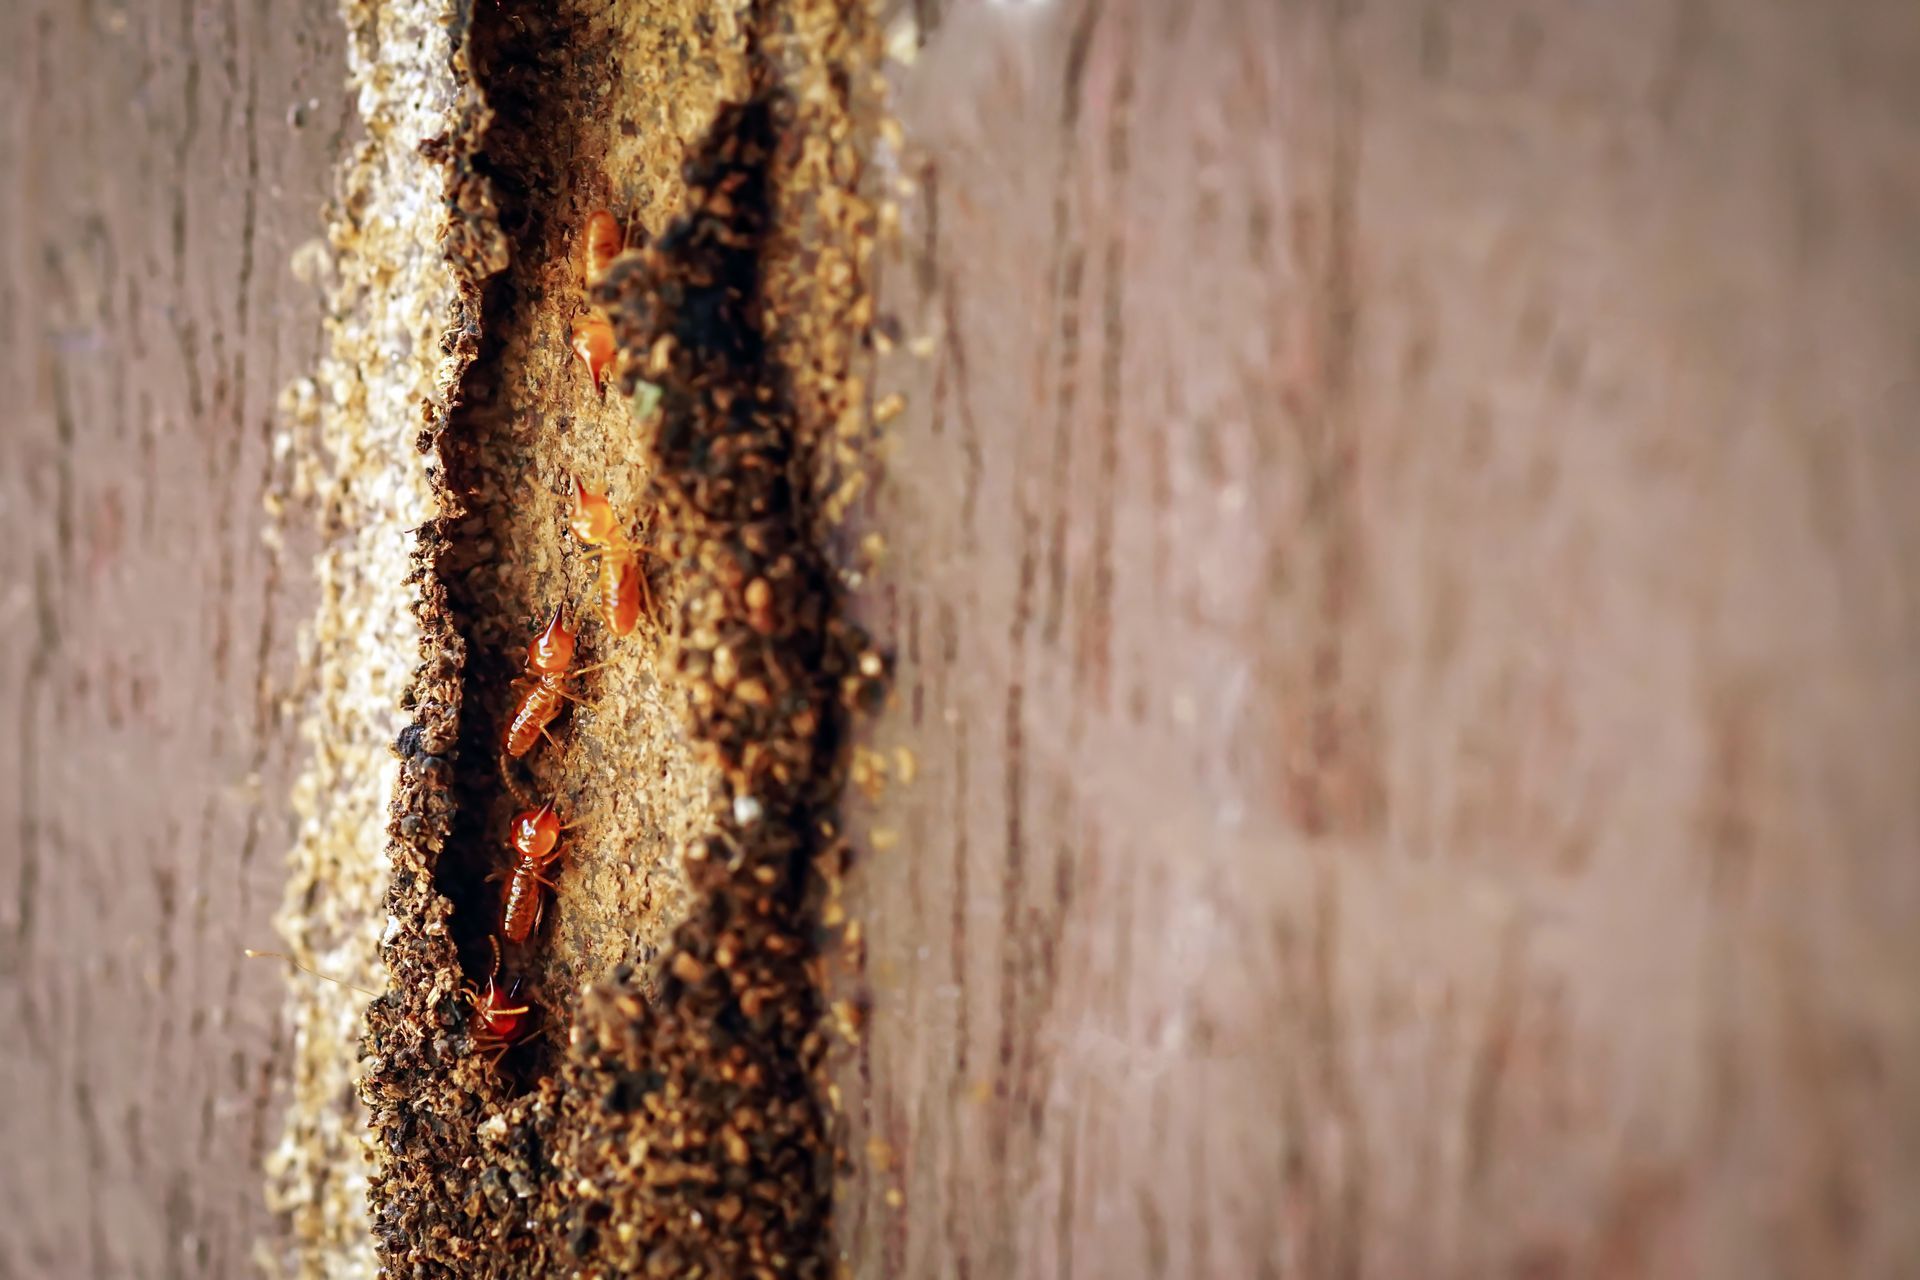 a group of termites are crawling on a piece of wood